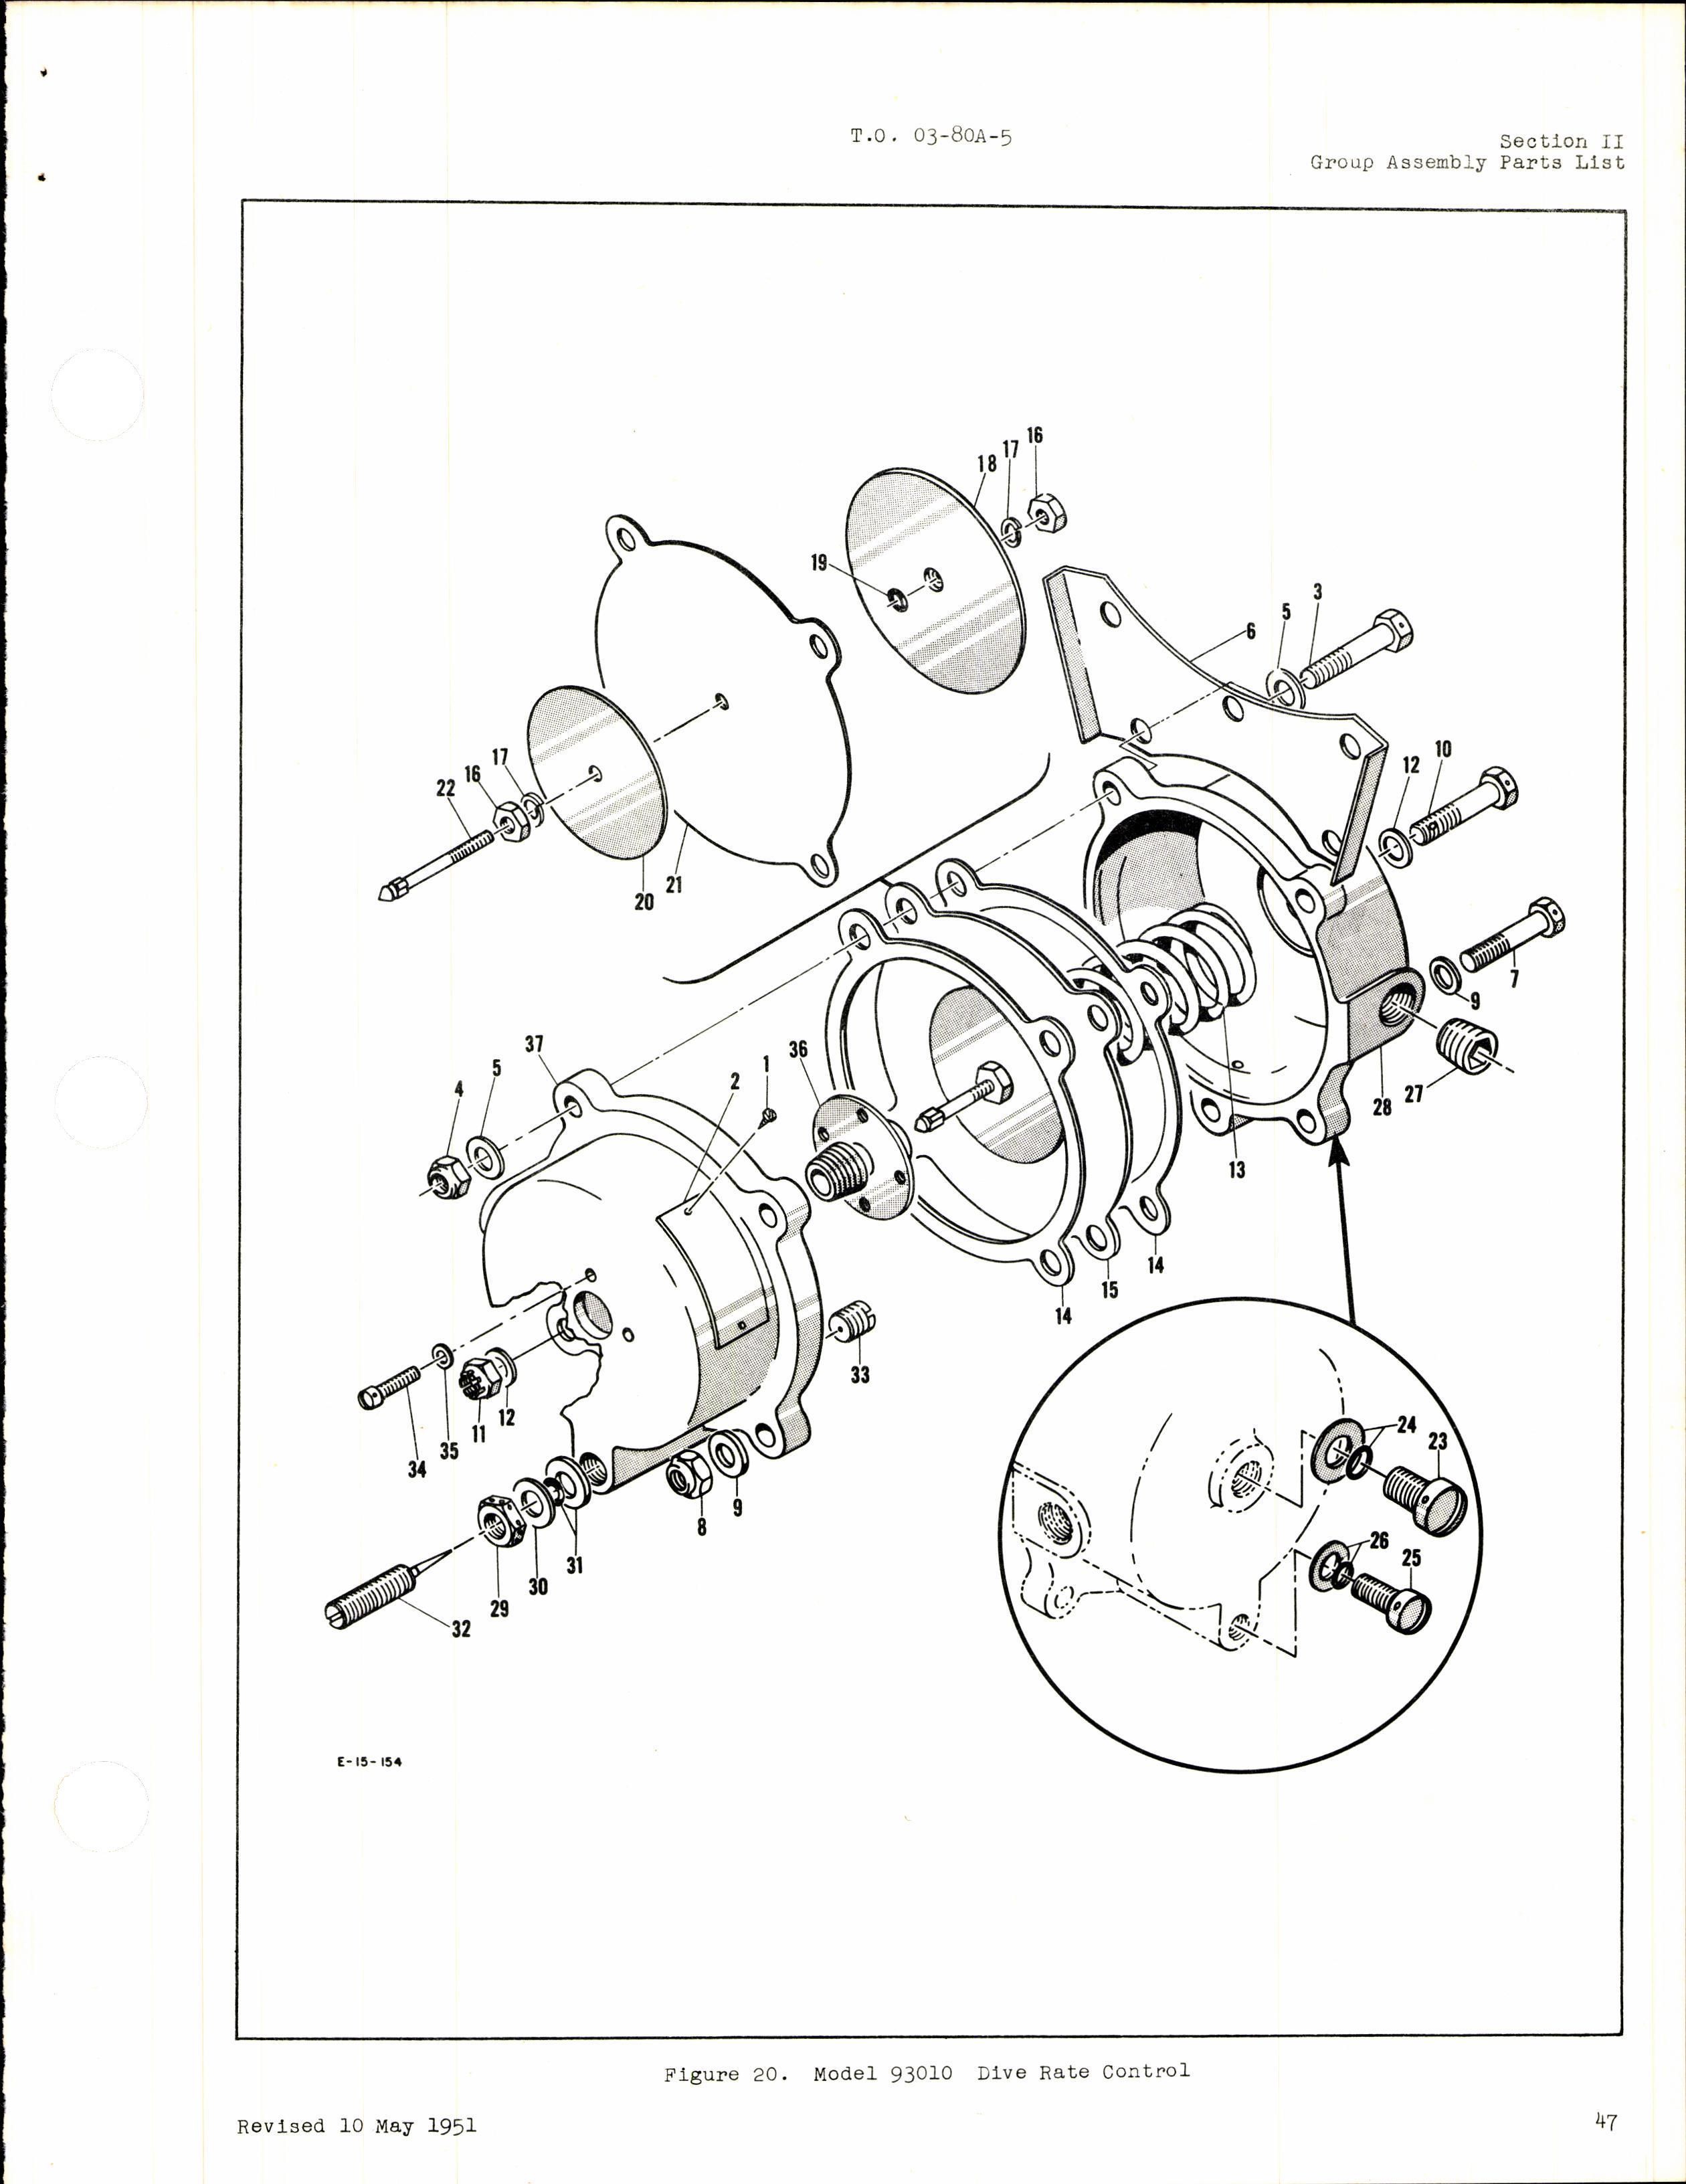 Sample page 37 from AirCorps Library document: Parts Catalog for Airesearch Cabin Pressure Regulators